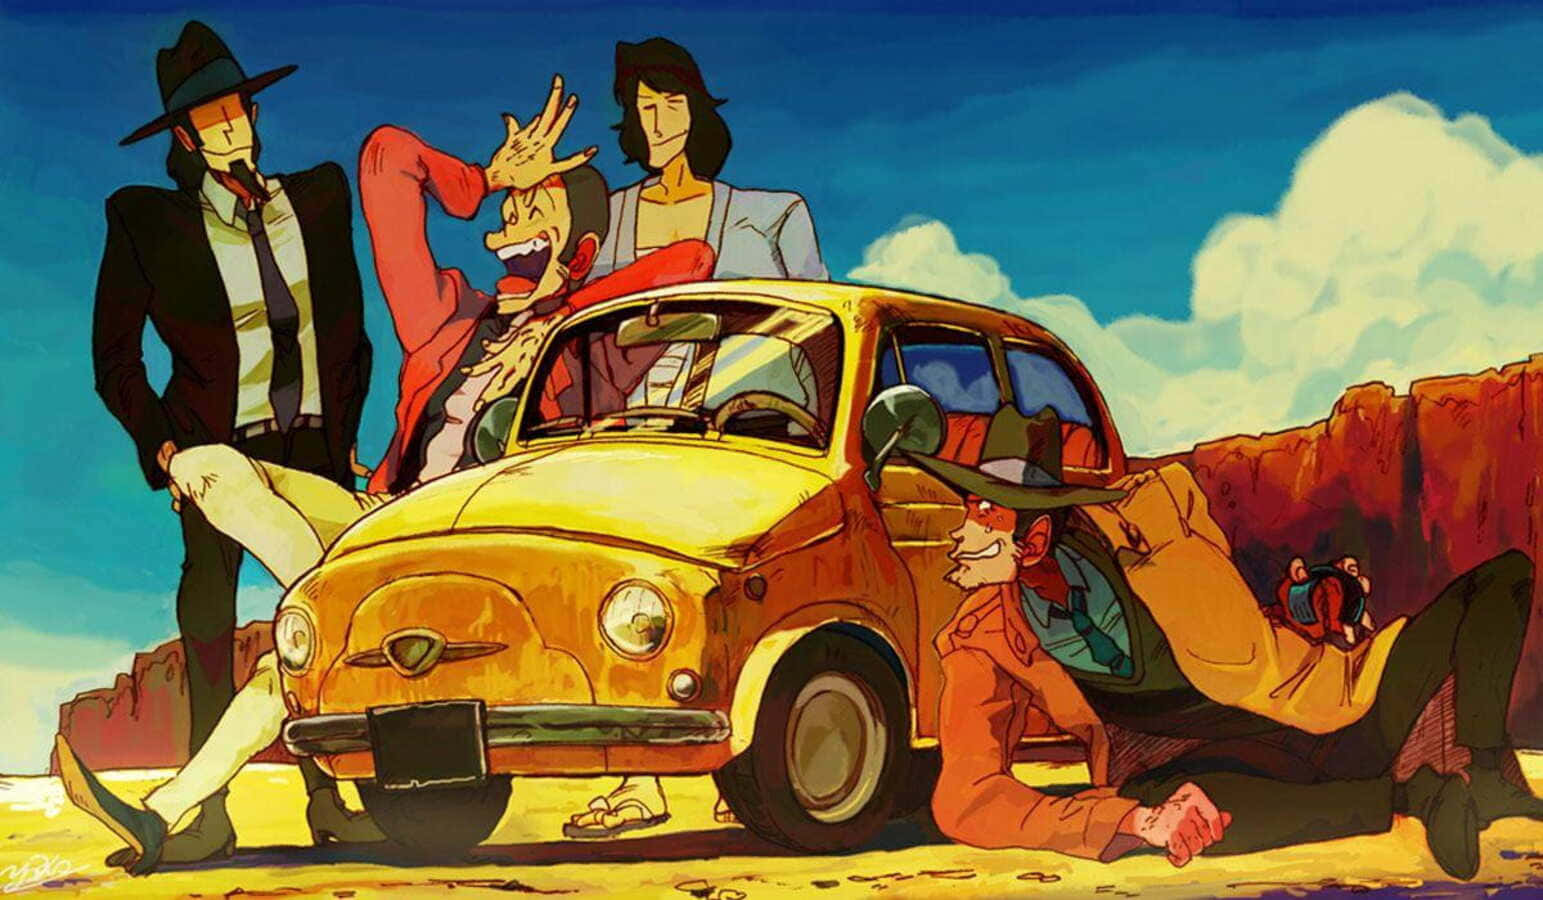 Lupin III and his team in The Castle of Cagliostro adventure. Wallpaper